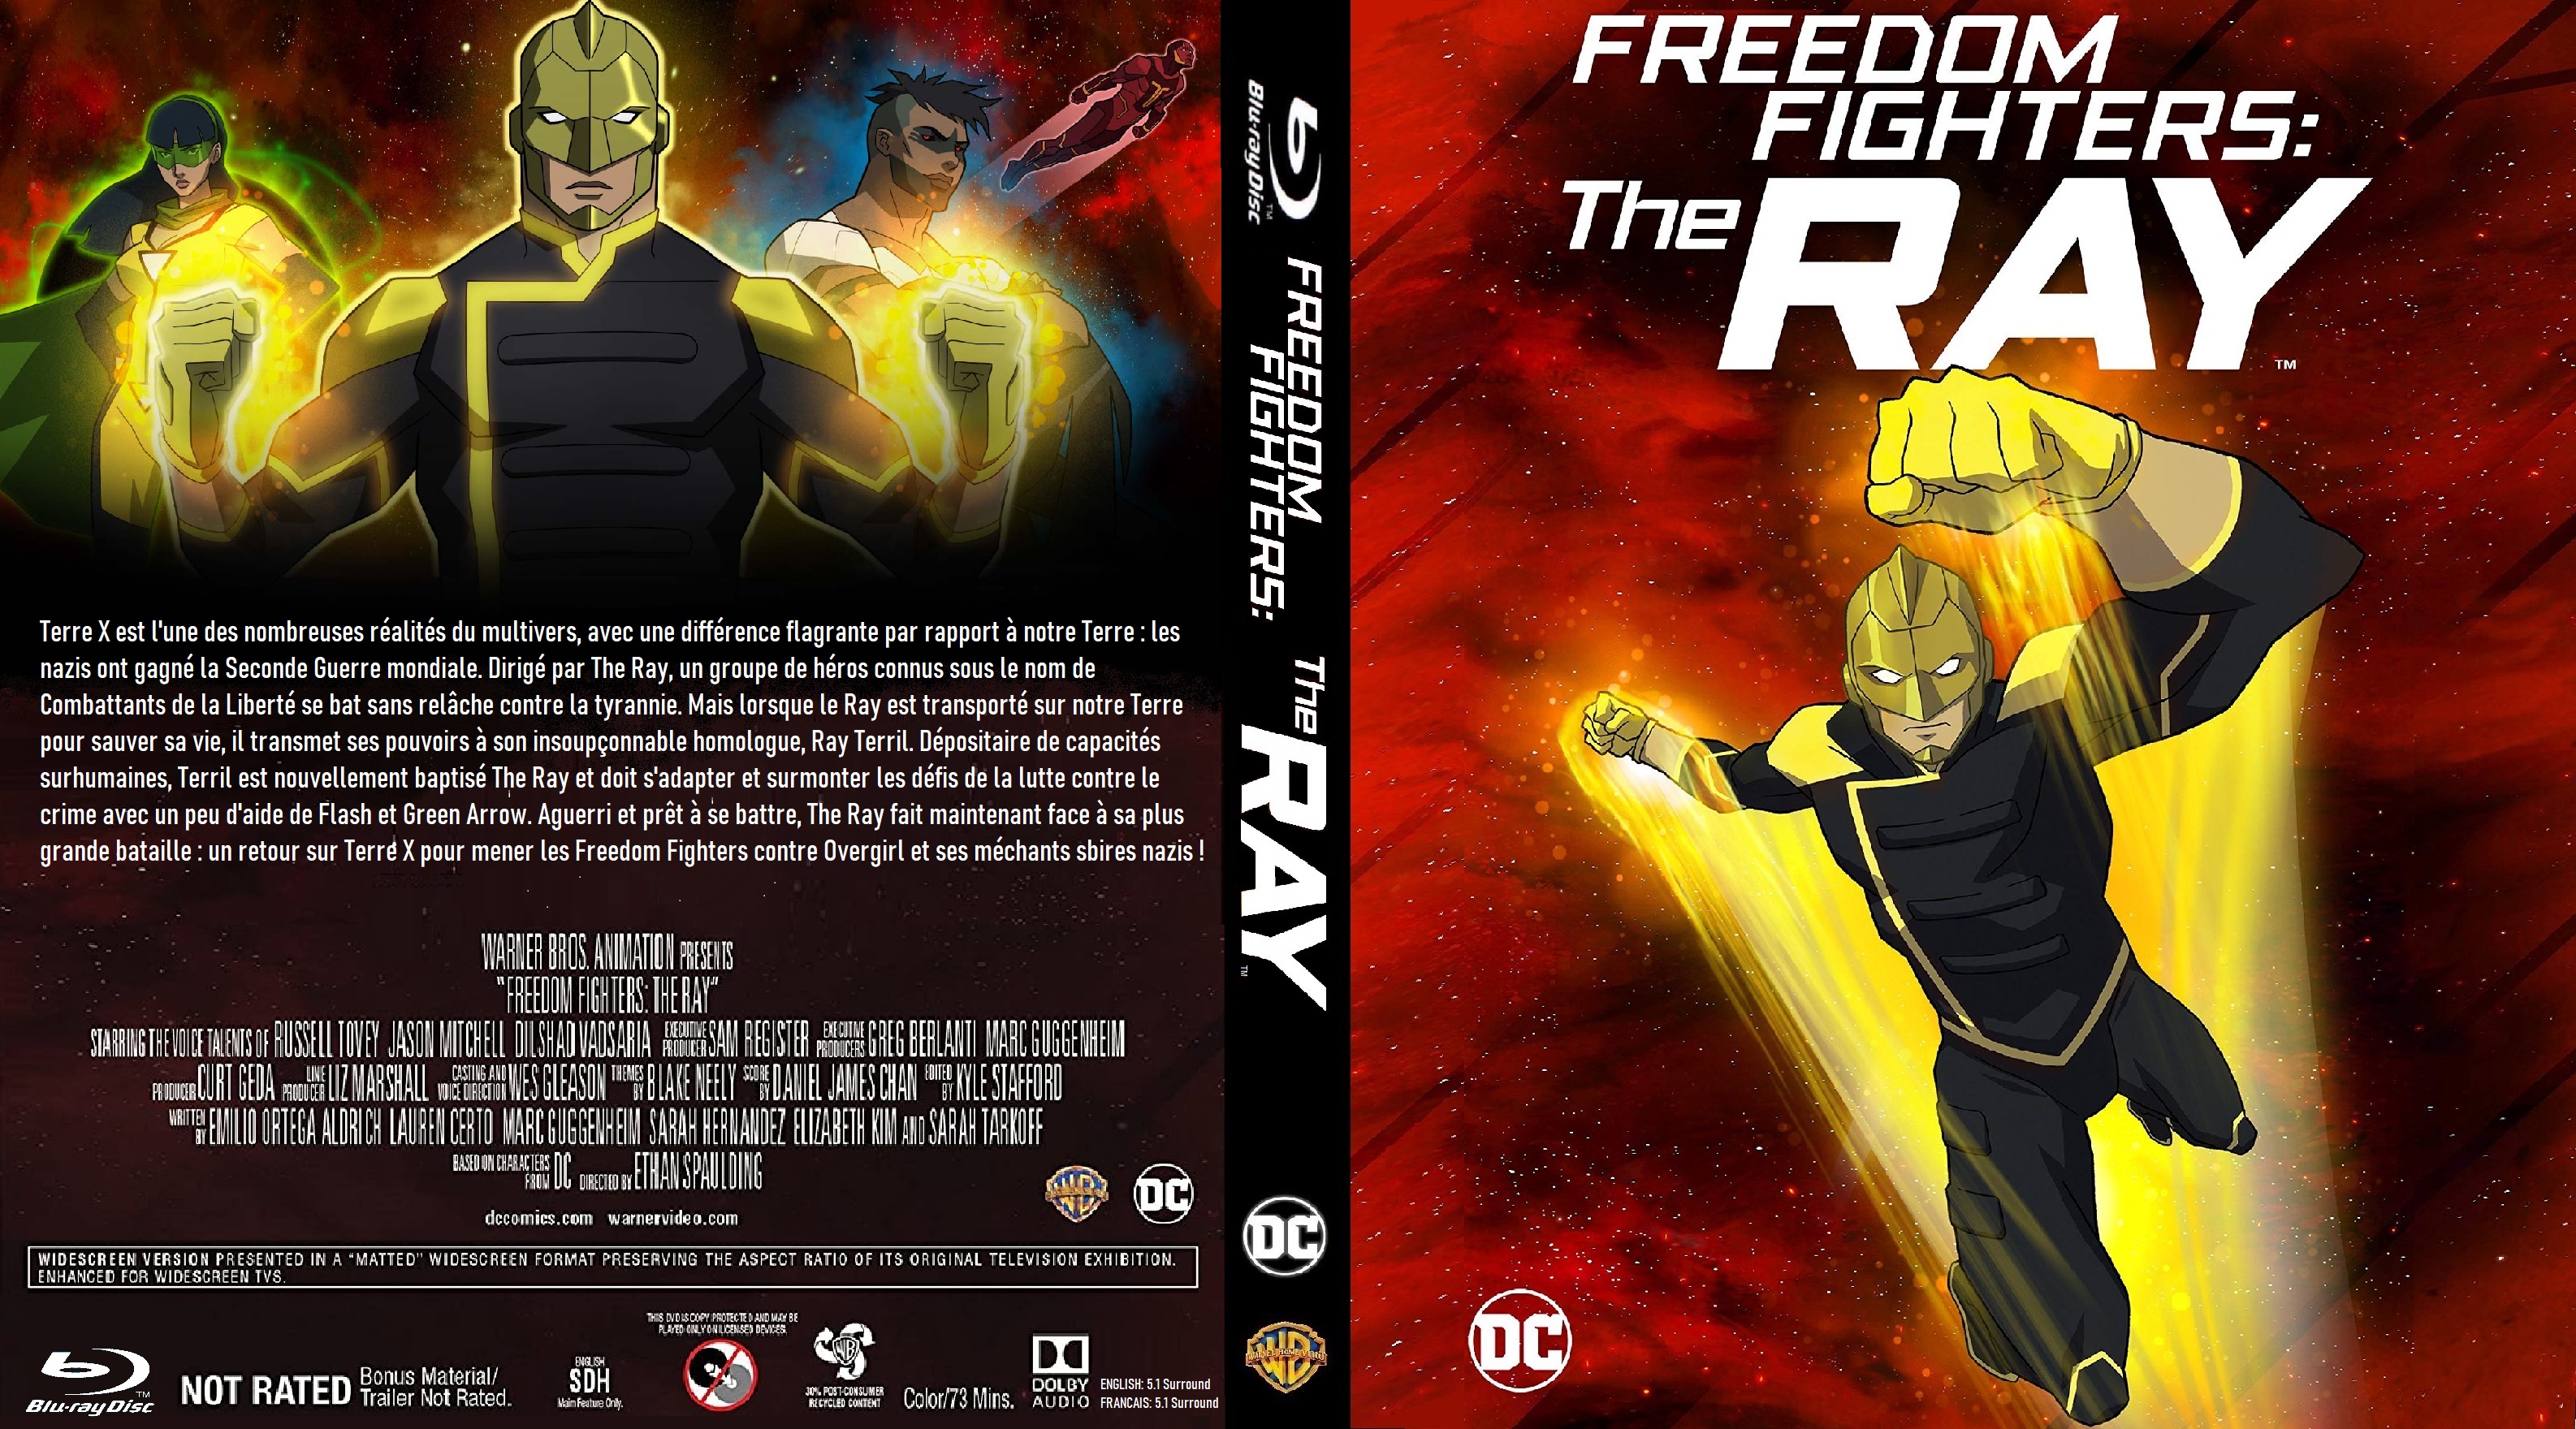 Jaquette DVD Freedom Fighters The Ray Saison 1 custom (BLU-RAY)